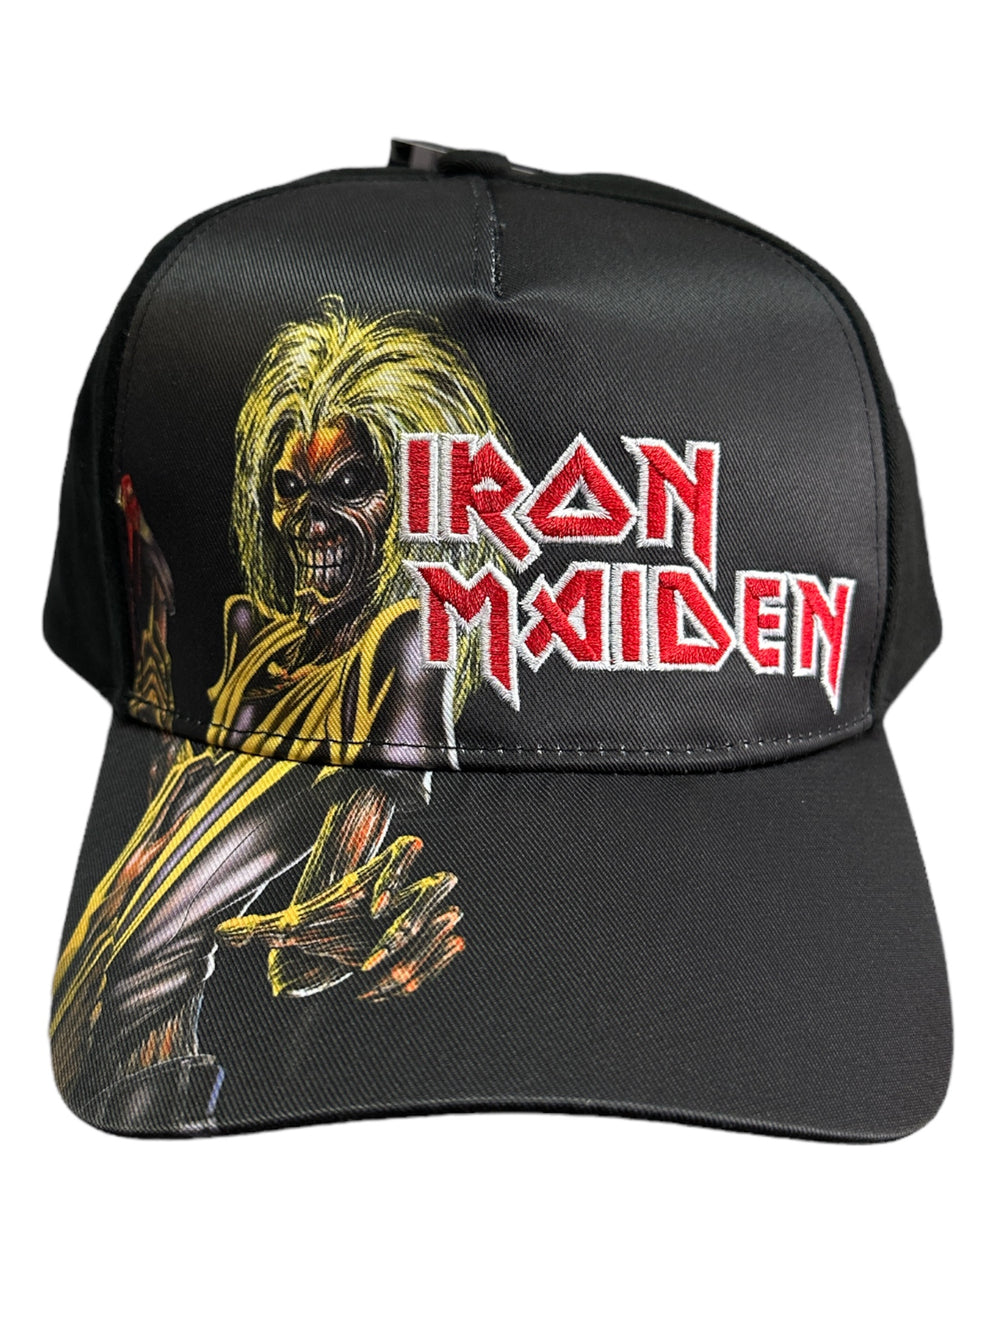 Iron Maiden Official Killers Embroid Peak Cap  Brand New